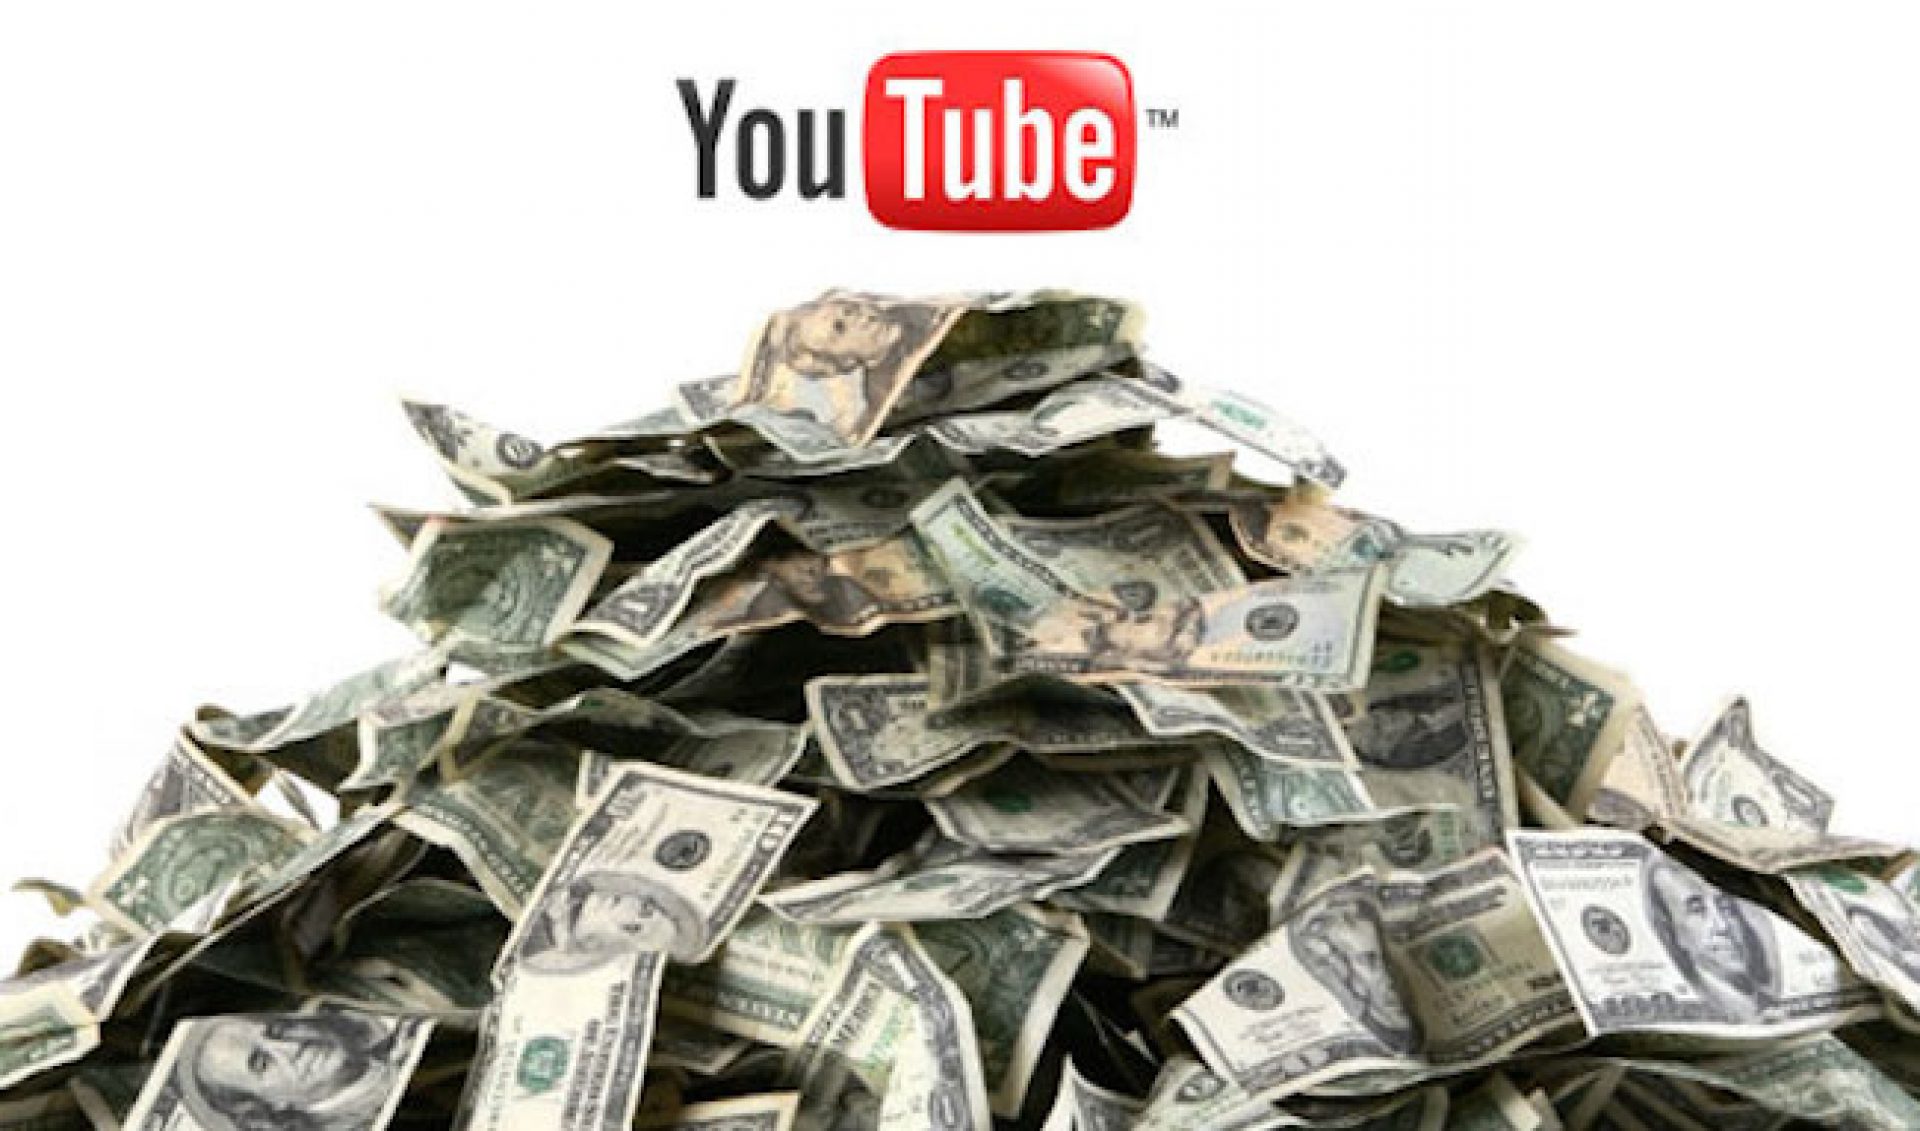 YouTube Is Not Starting Another Multimillion Dollar Original Channels Initiative